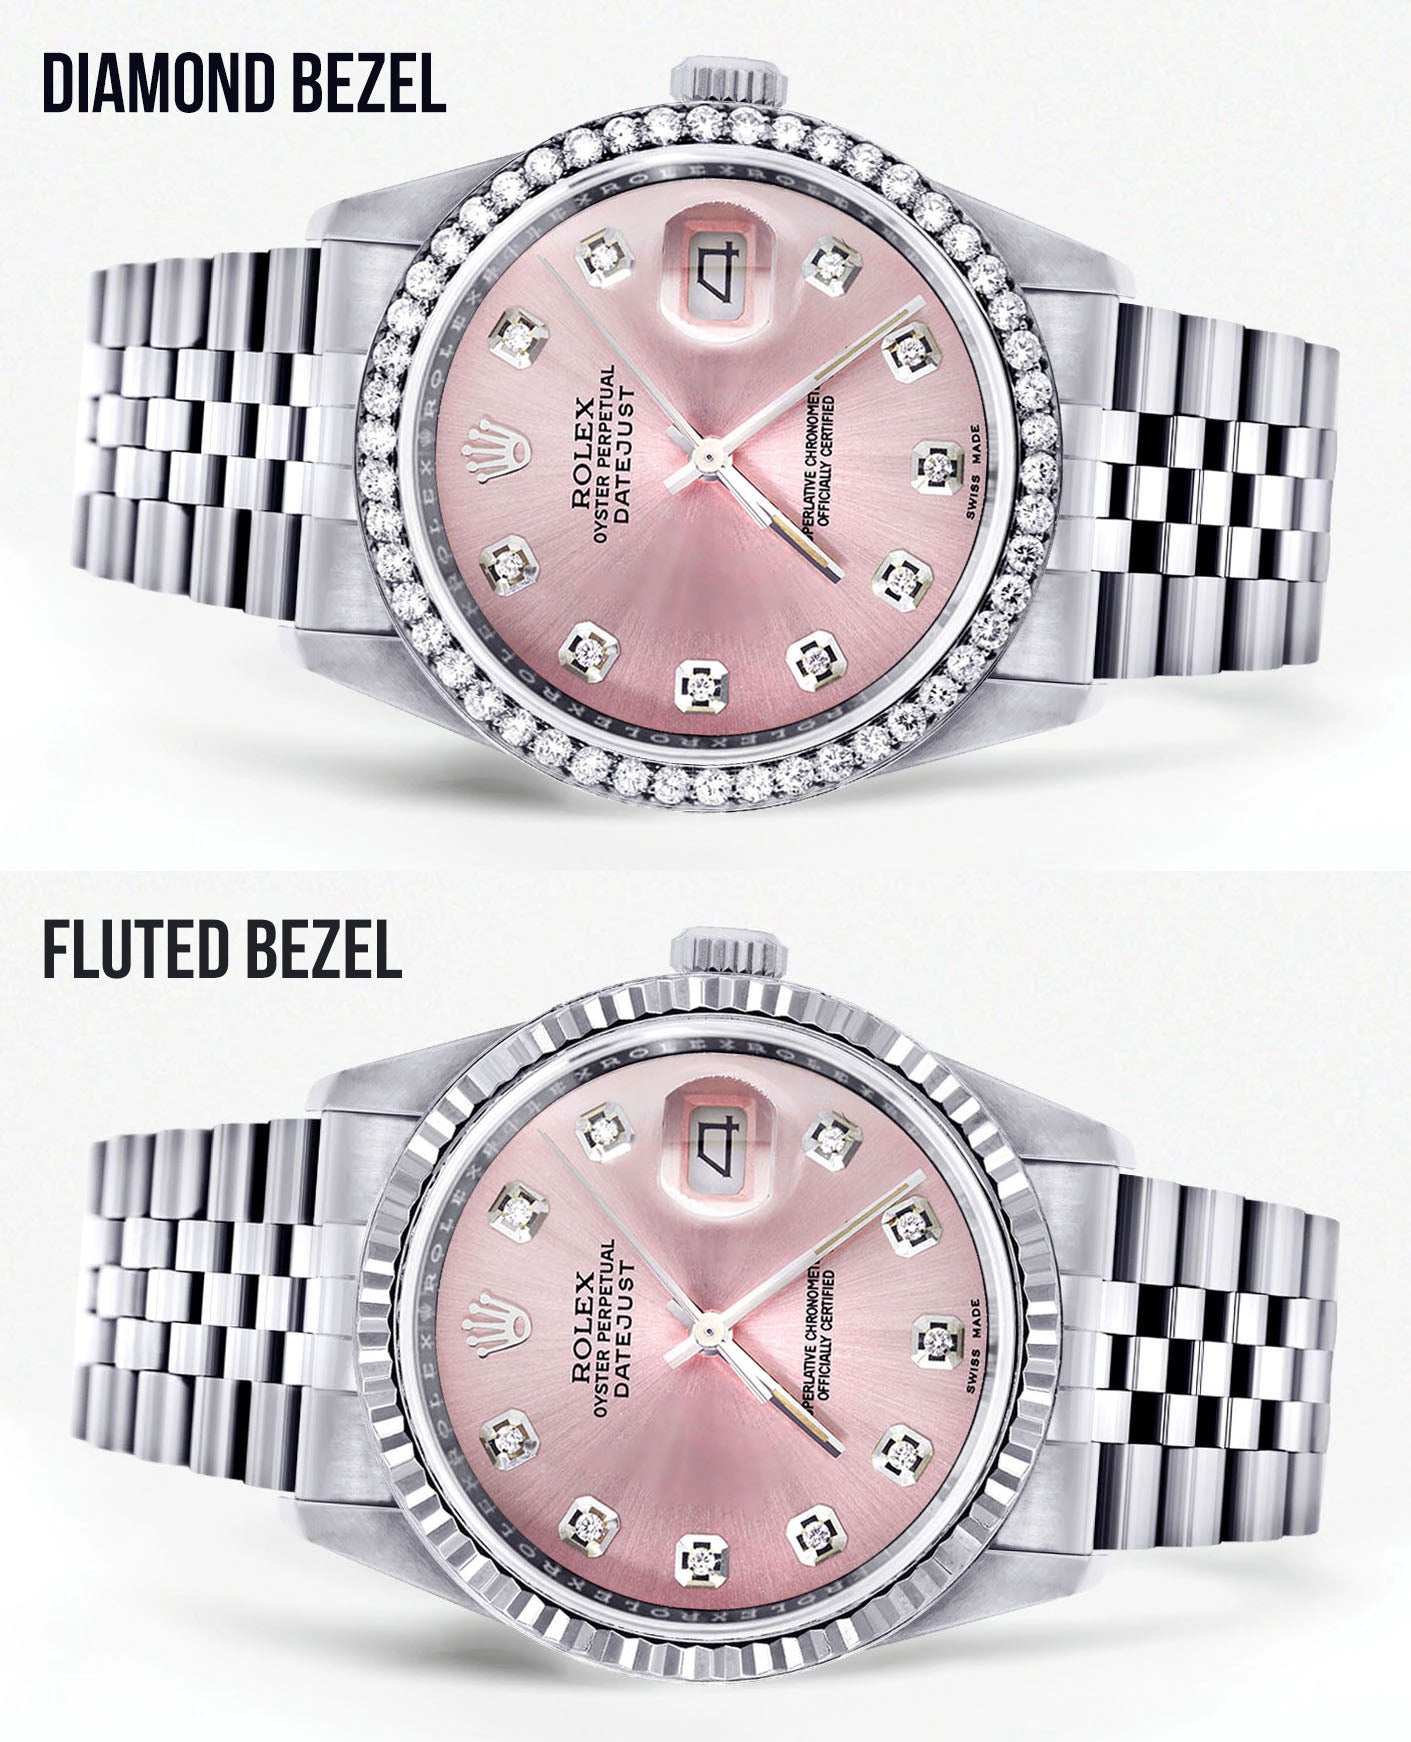 Mens Rolex Datejust Watch 16200 | 36Mm | Pink Dial | Jubilee Band